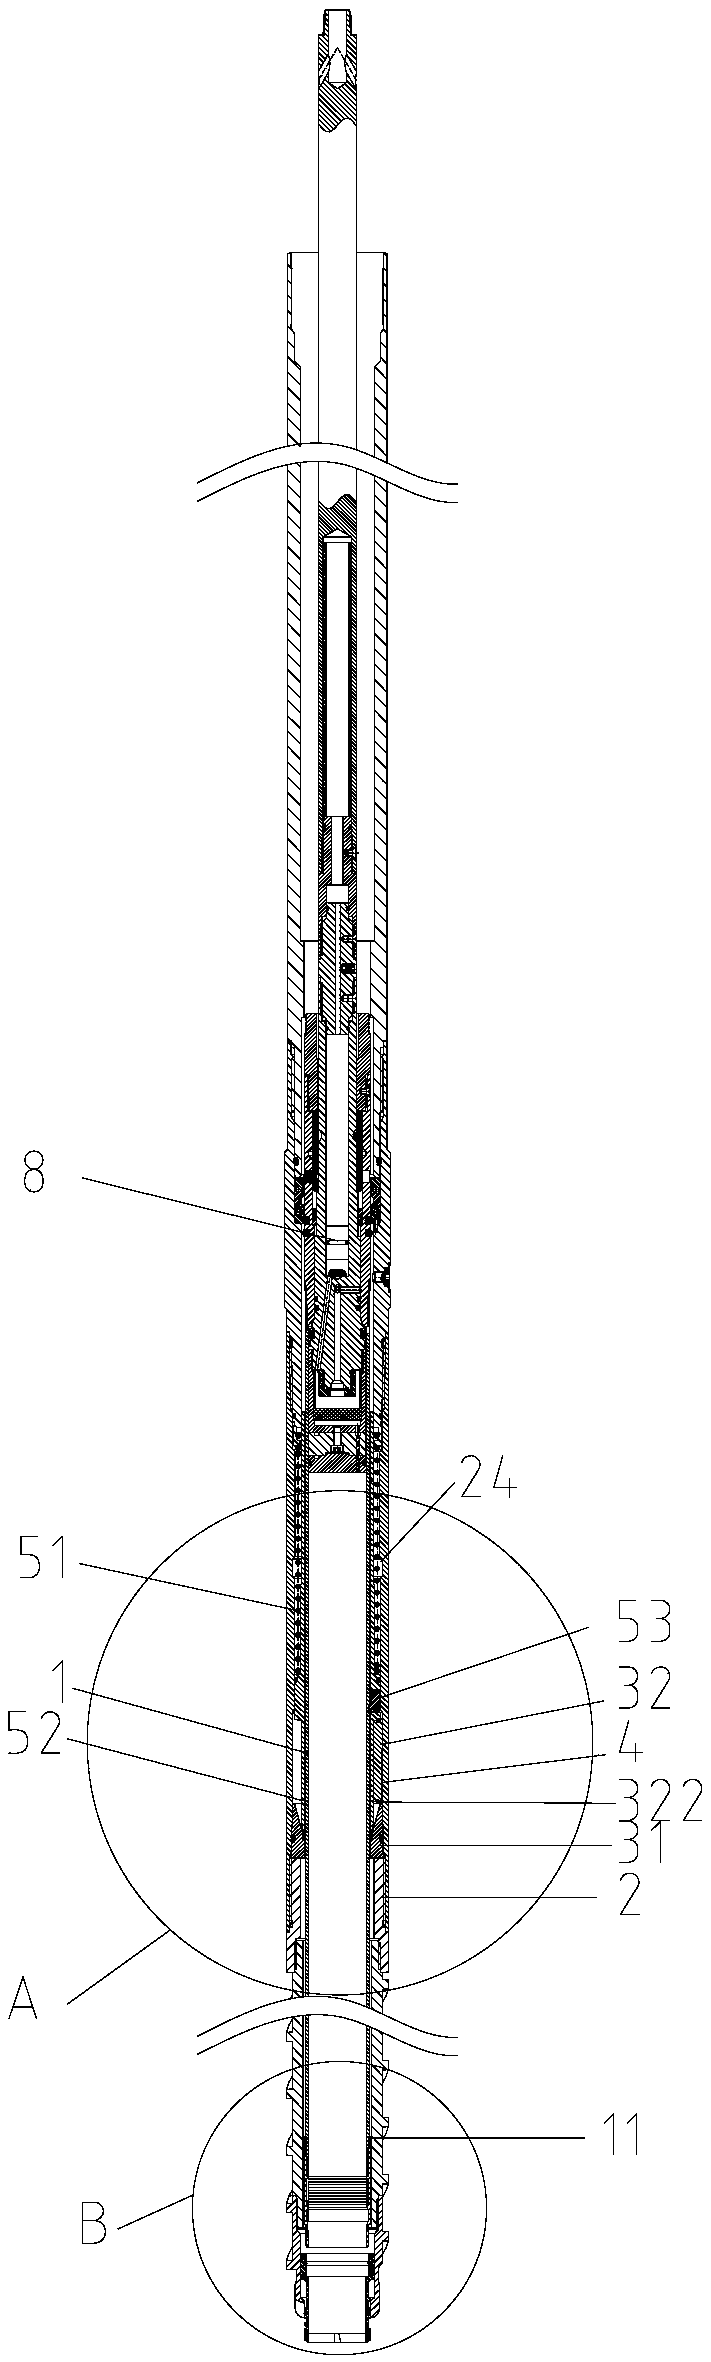 Core barrel sealing structure capable of increasing sealing specific pressure